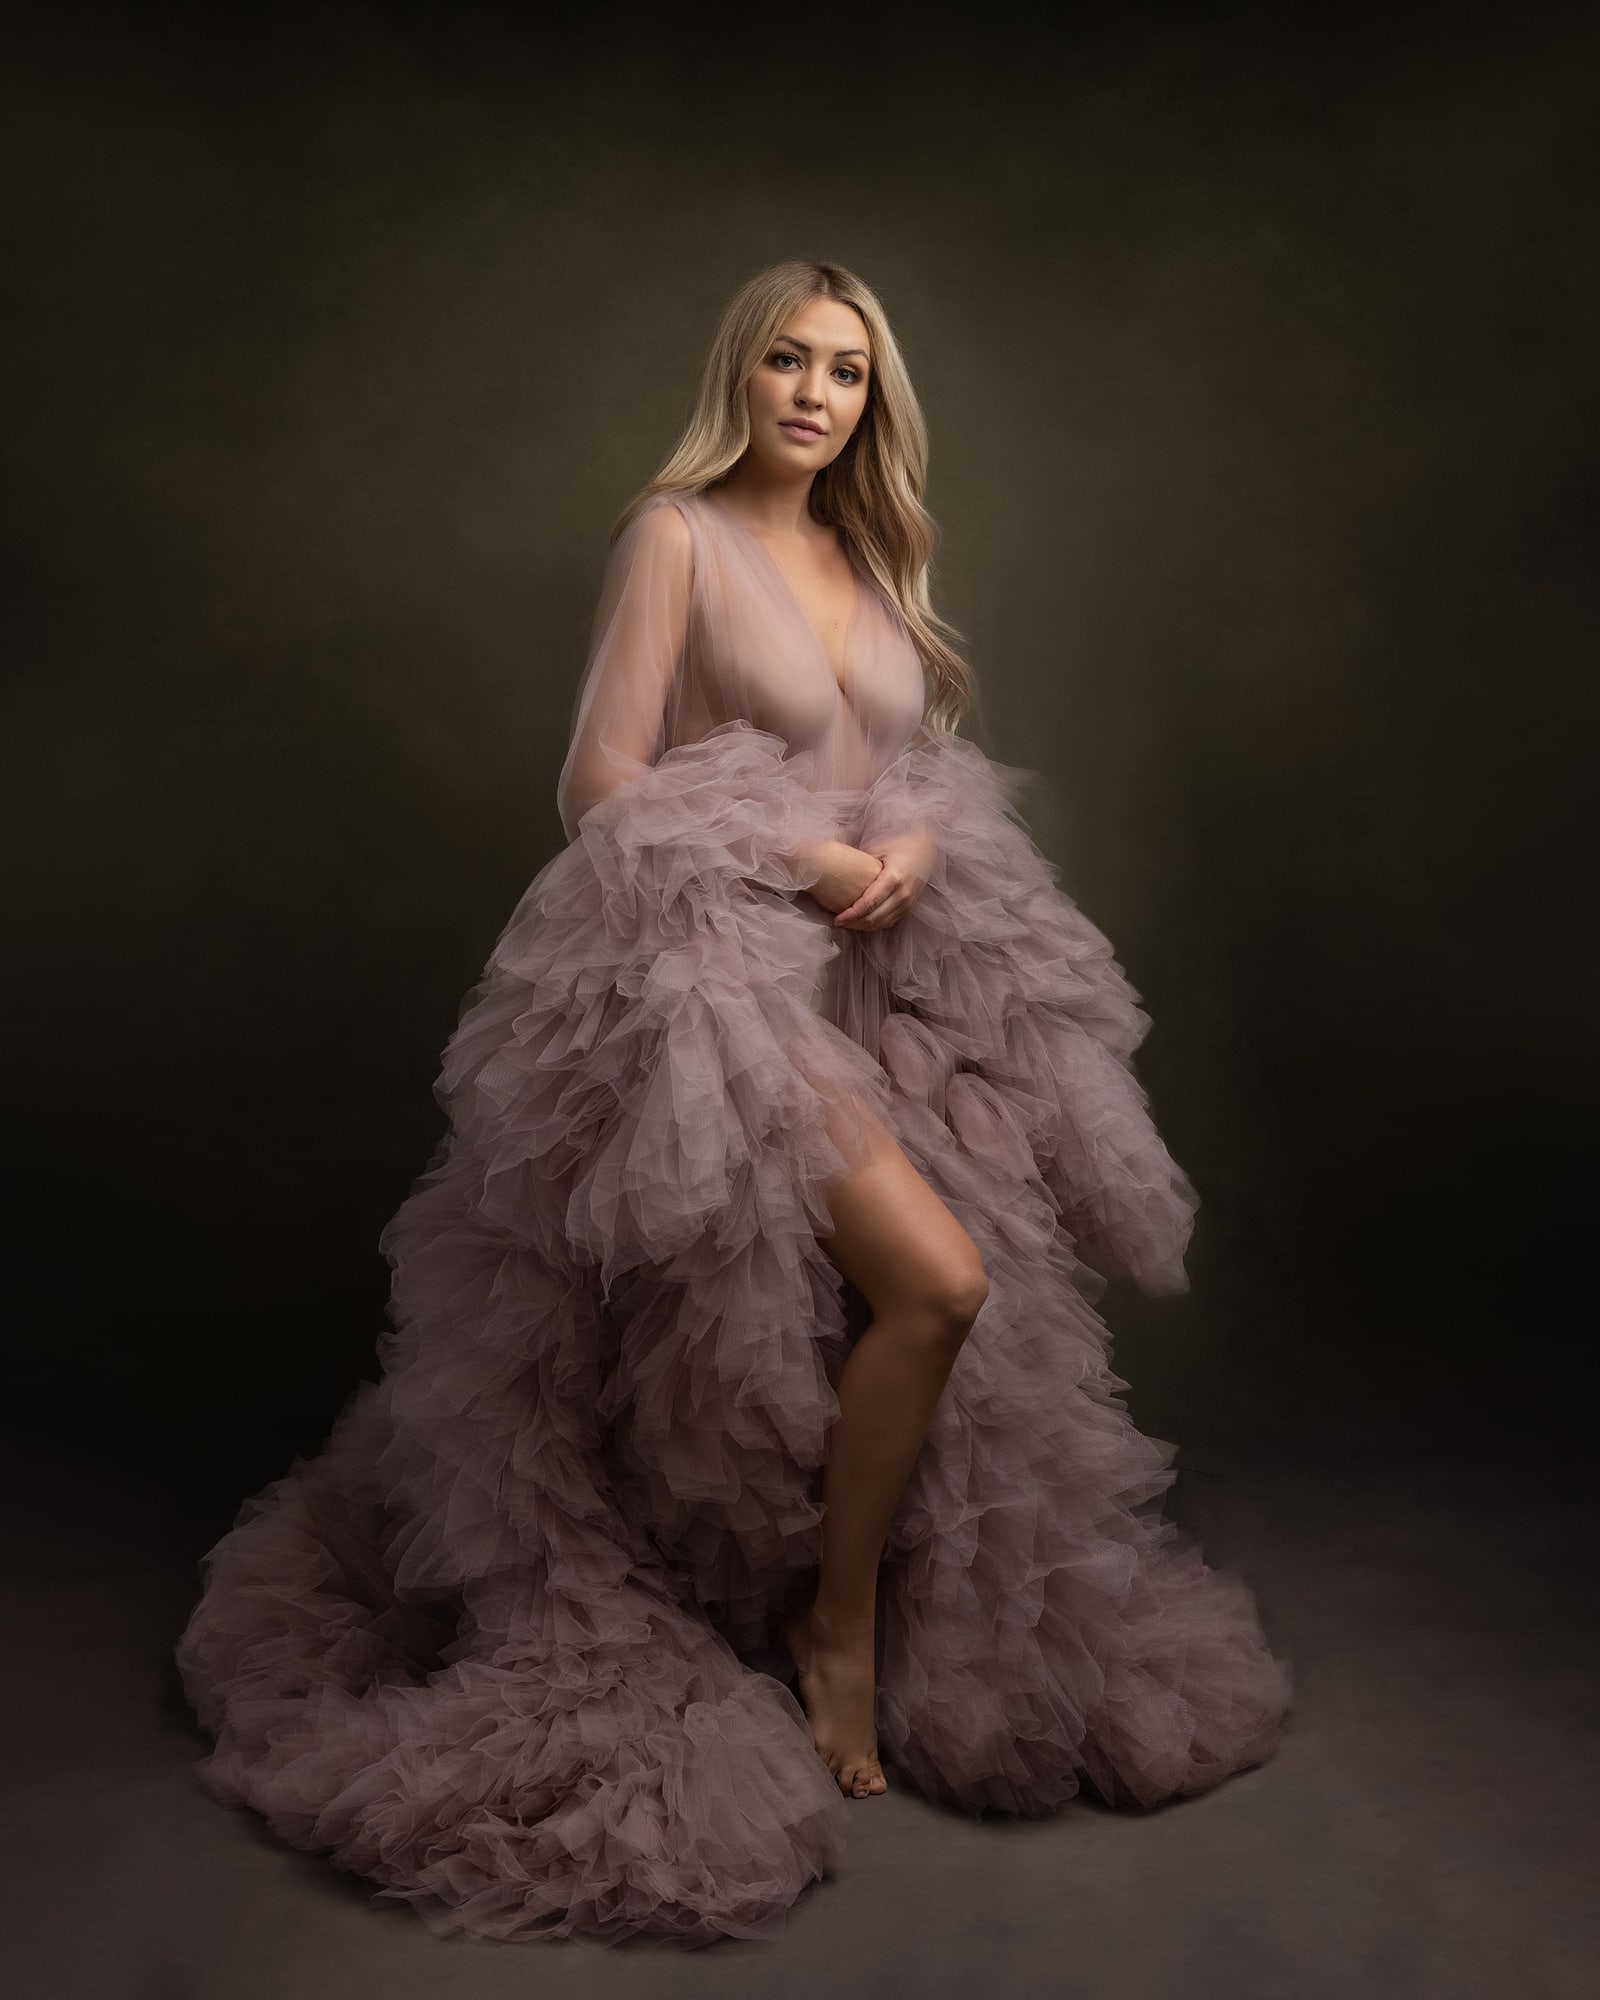 Blonde woman wears a pink tulle gown during her Beauty Photo shoot in Suffolk Studio